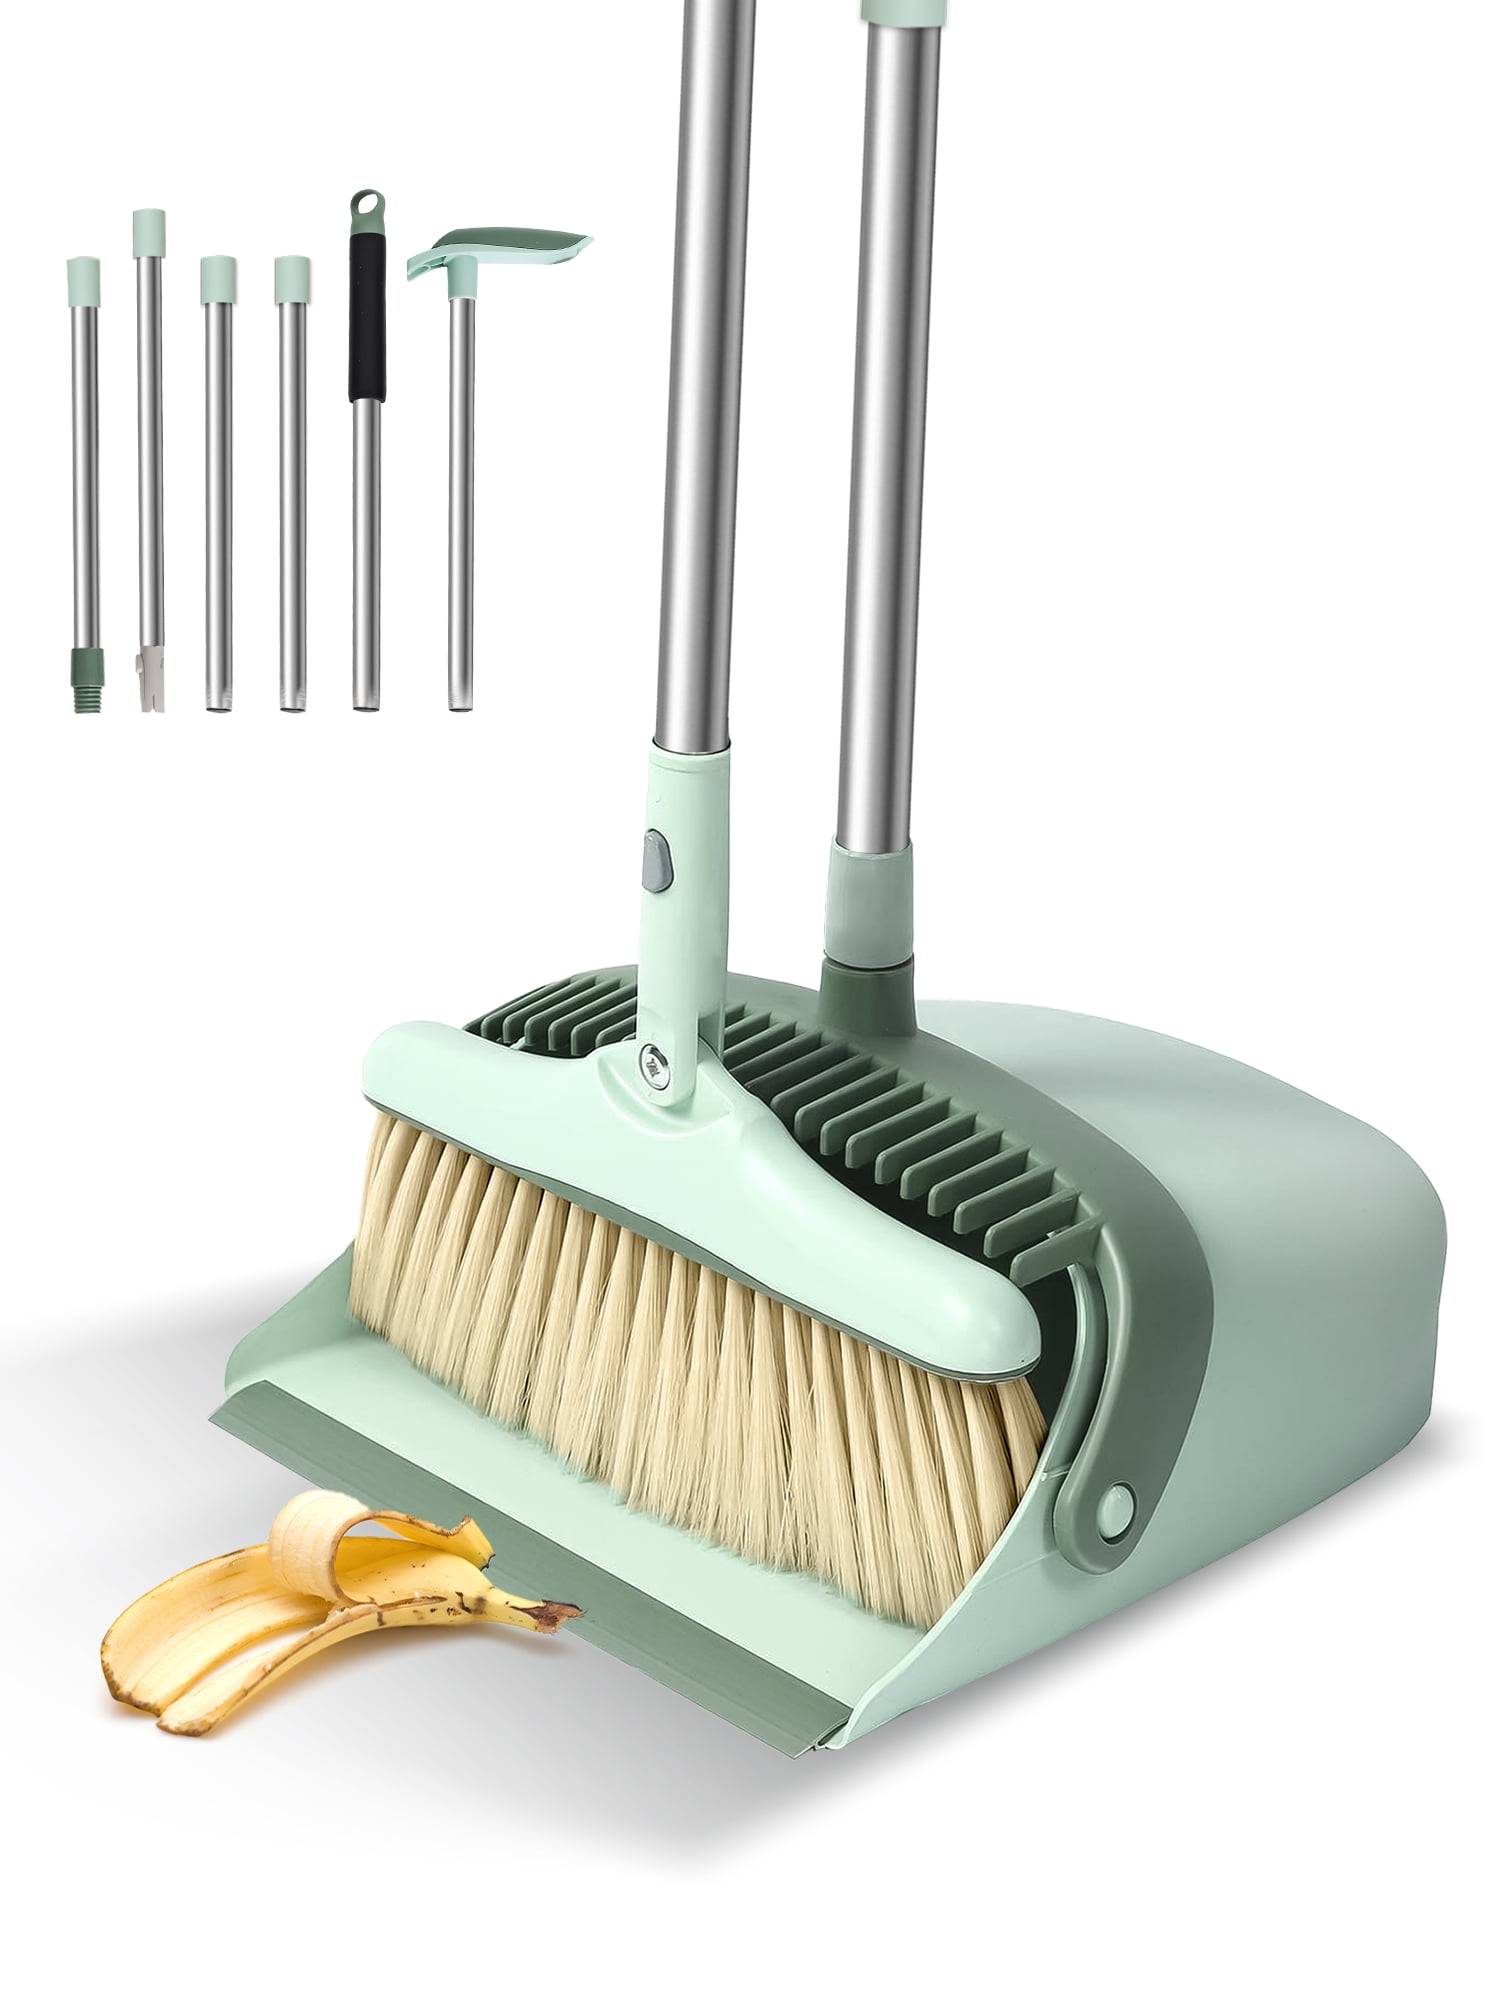 Broom And Dustpan Set - SHLQ354 - IdeaStage Promotional Products